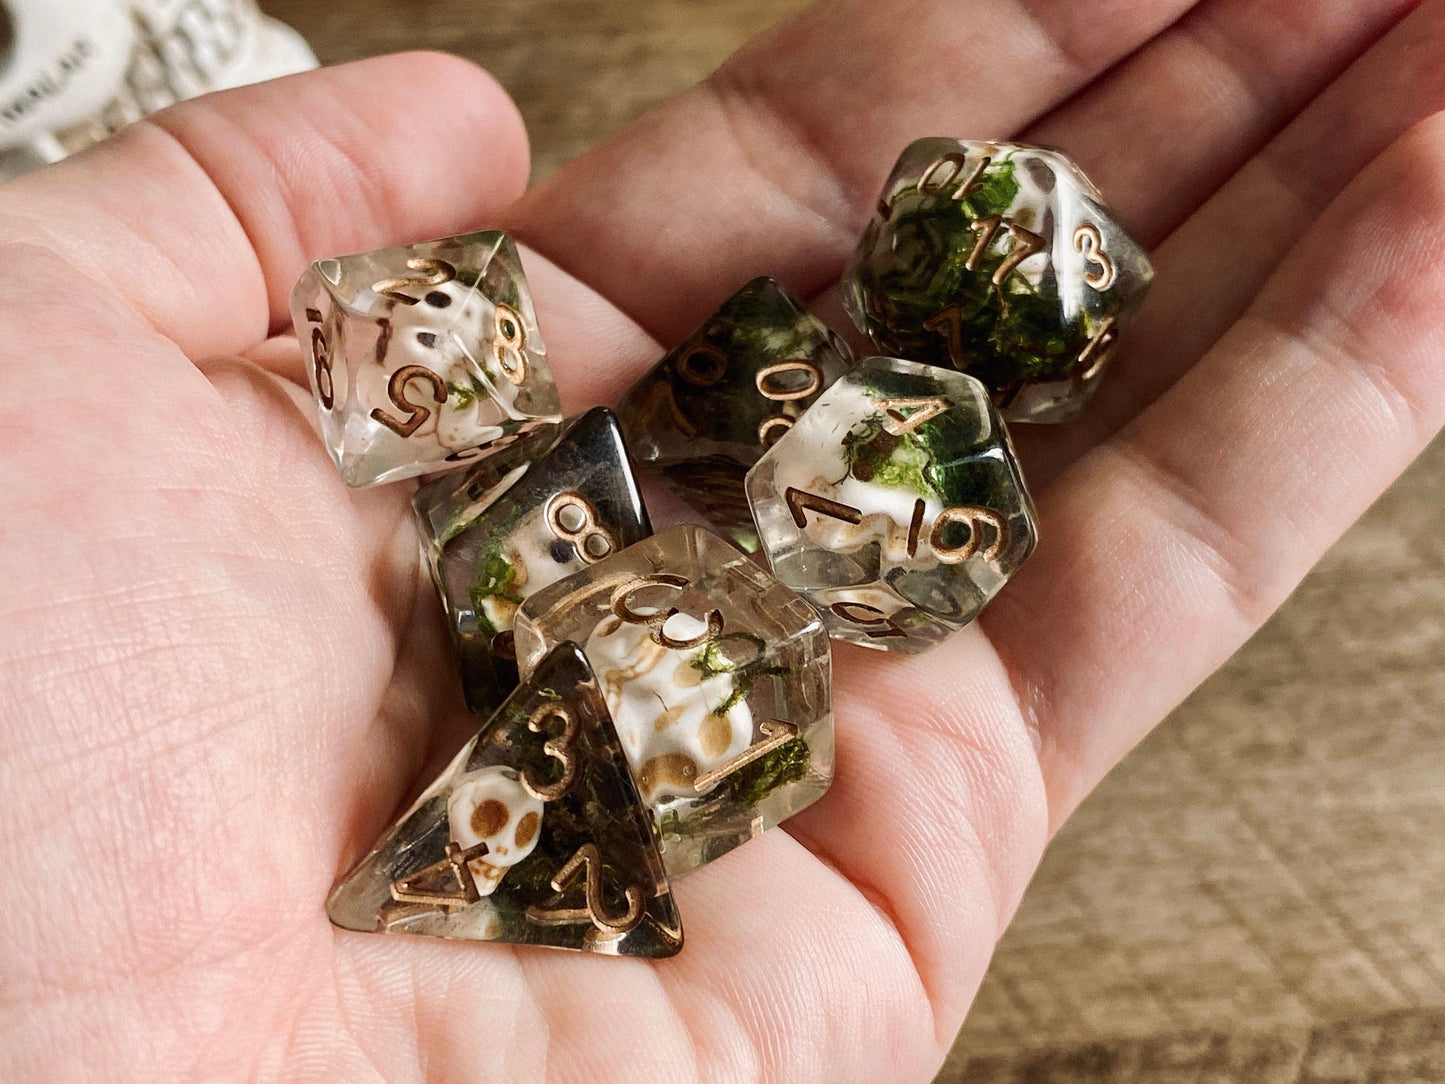 The Crooked Tavern Dice Sets Undead Skull RPG Dice Set | Skulls and Real Moss Inside!